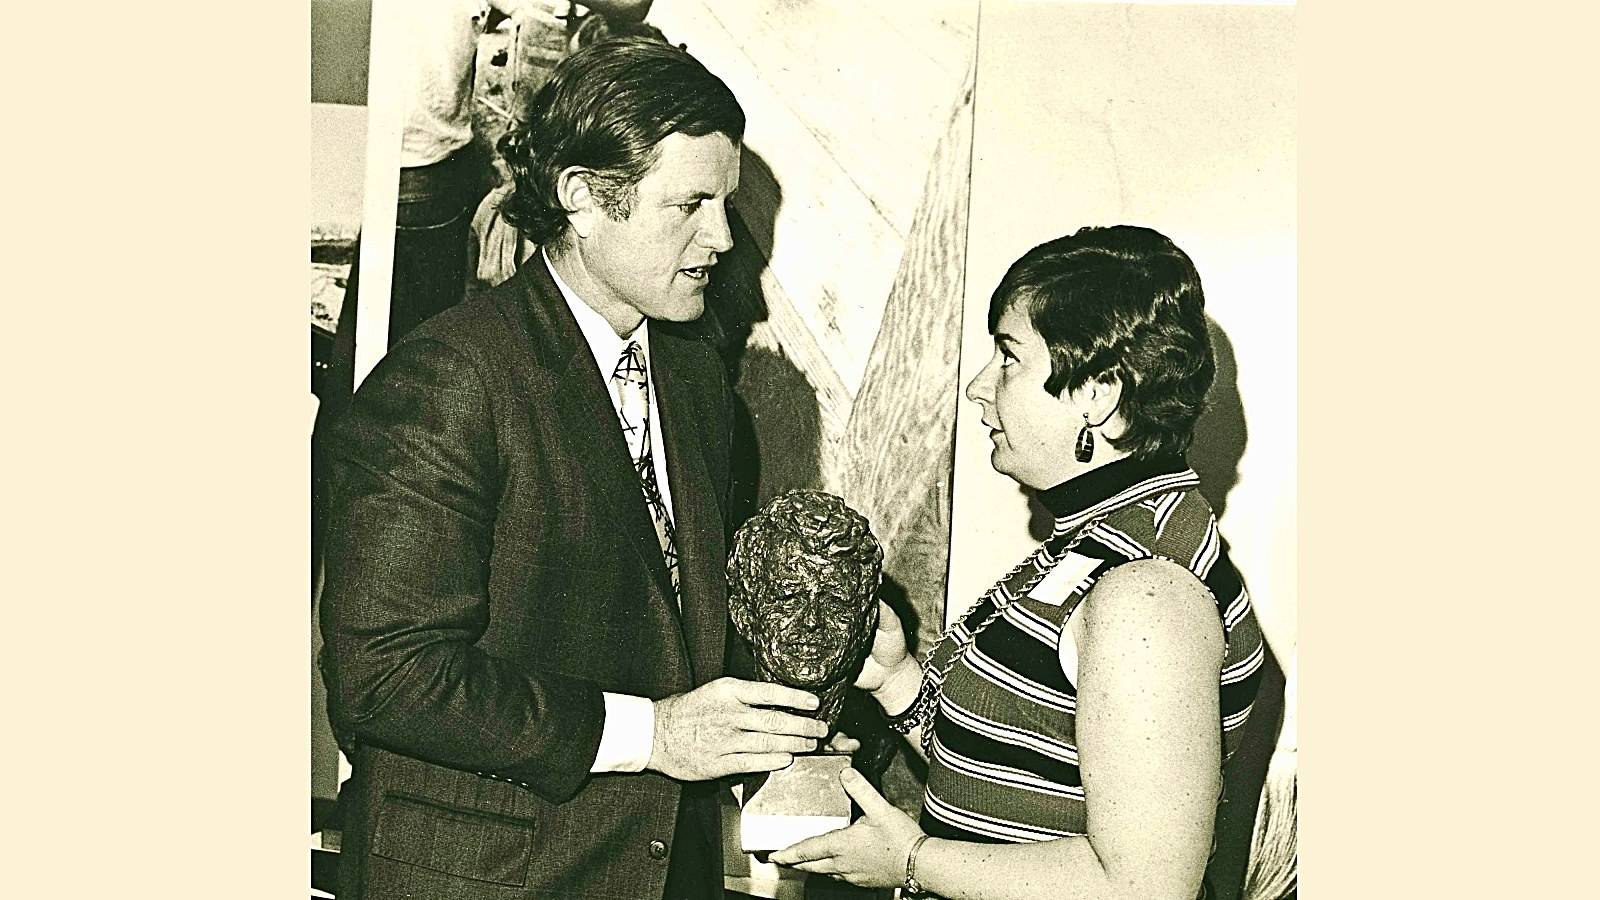 Sen. Edward M. Kennedy, D-Mass., presents the Robert F. Kennedy Journalism Award for the best newspaper coverage to Jean Heller, of the Associated Press special assignment team, in Washington, D.C., April 26, 1973. Miss Meller won the honor for her series on the Tuskegee Syphilis study.  


